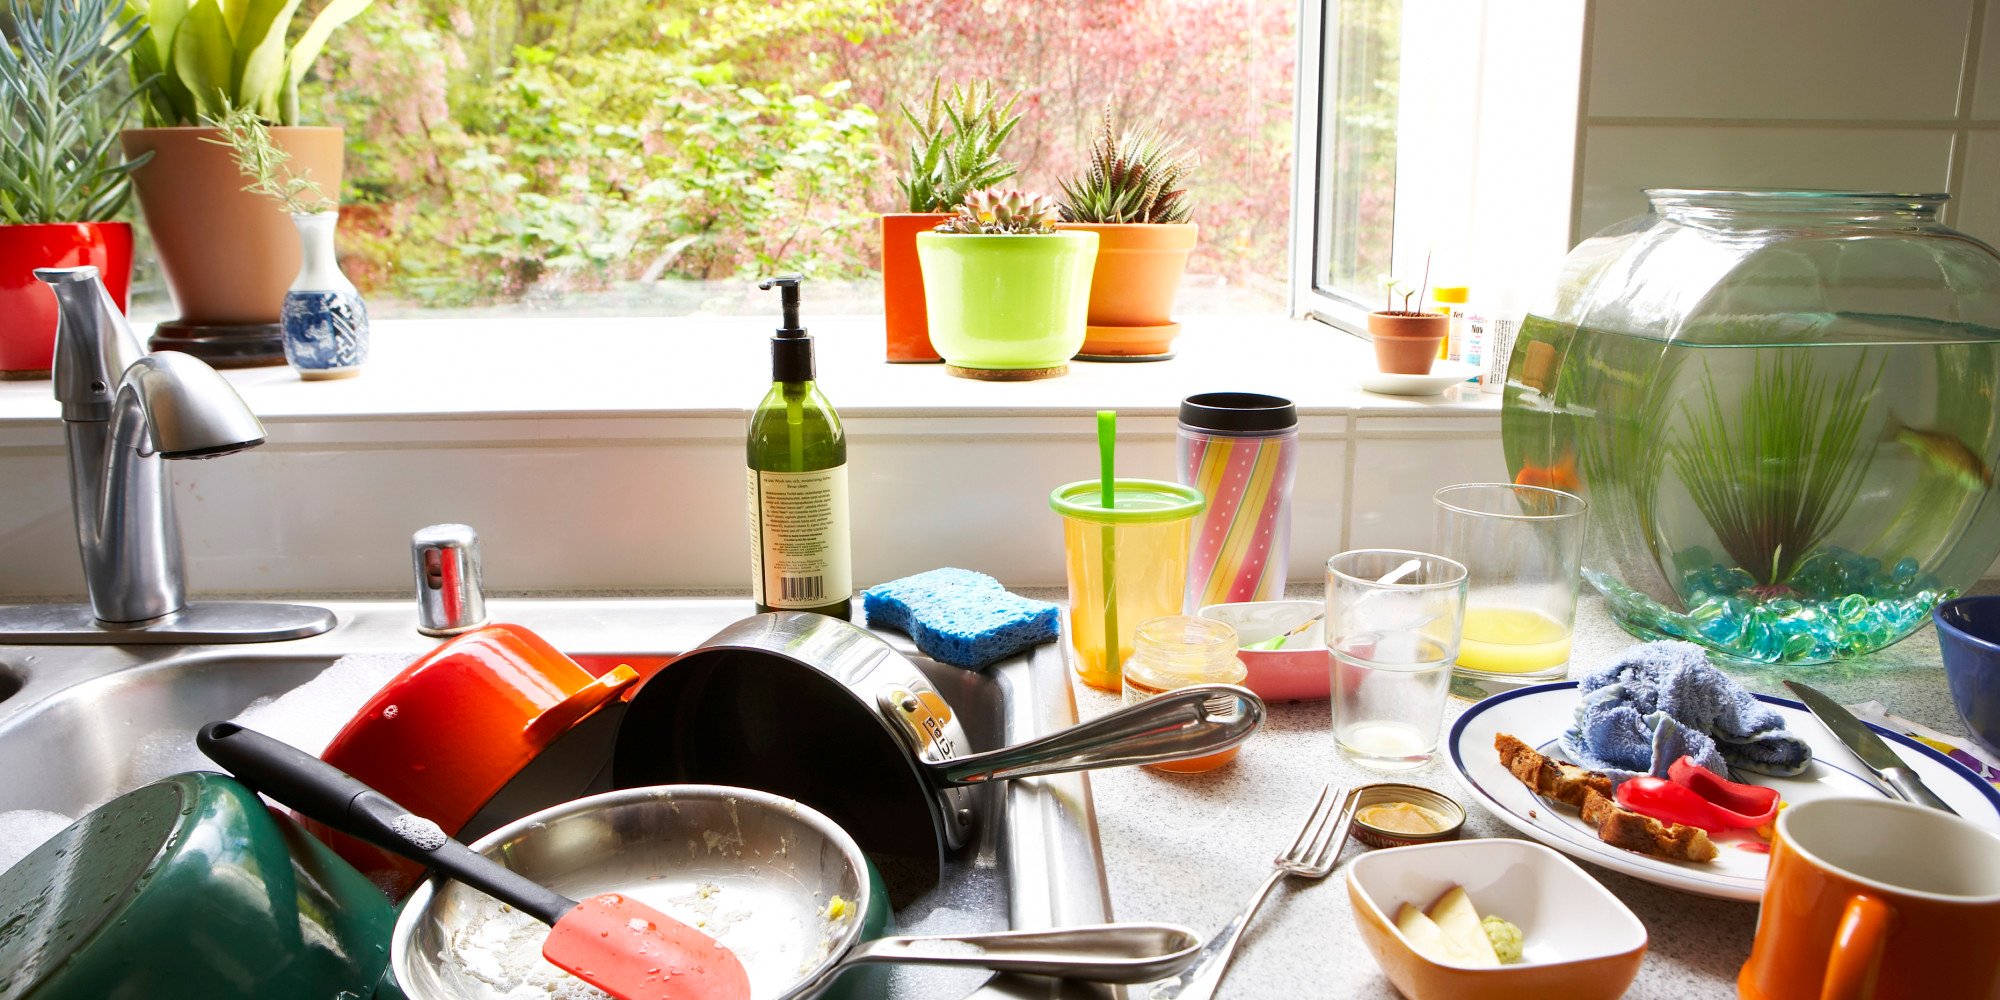 Kitchen cleanliness when guests leave